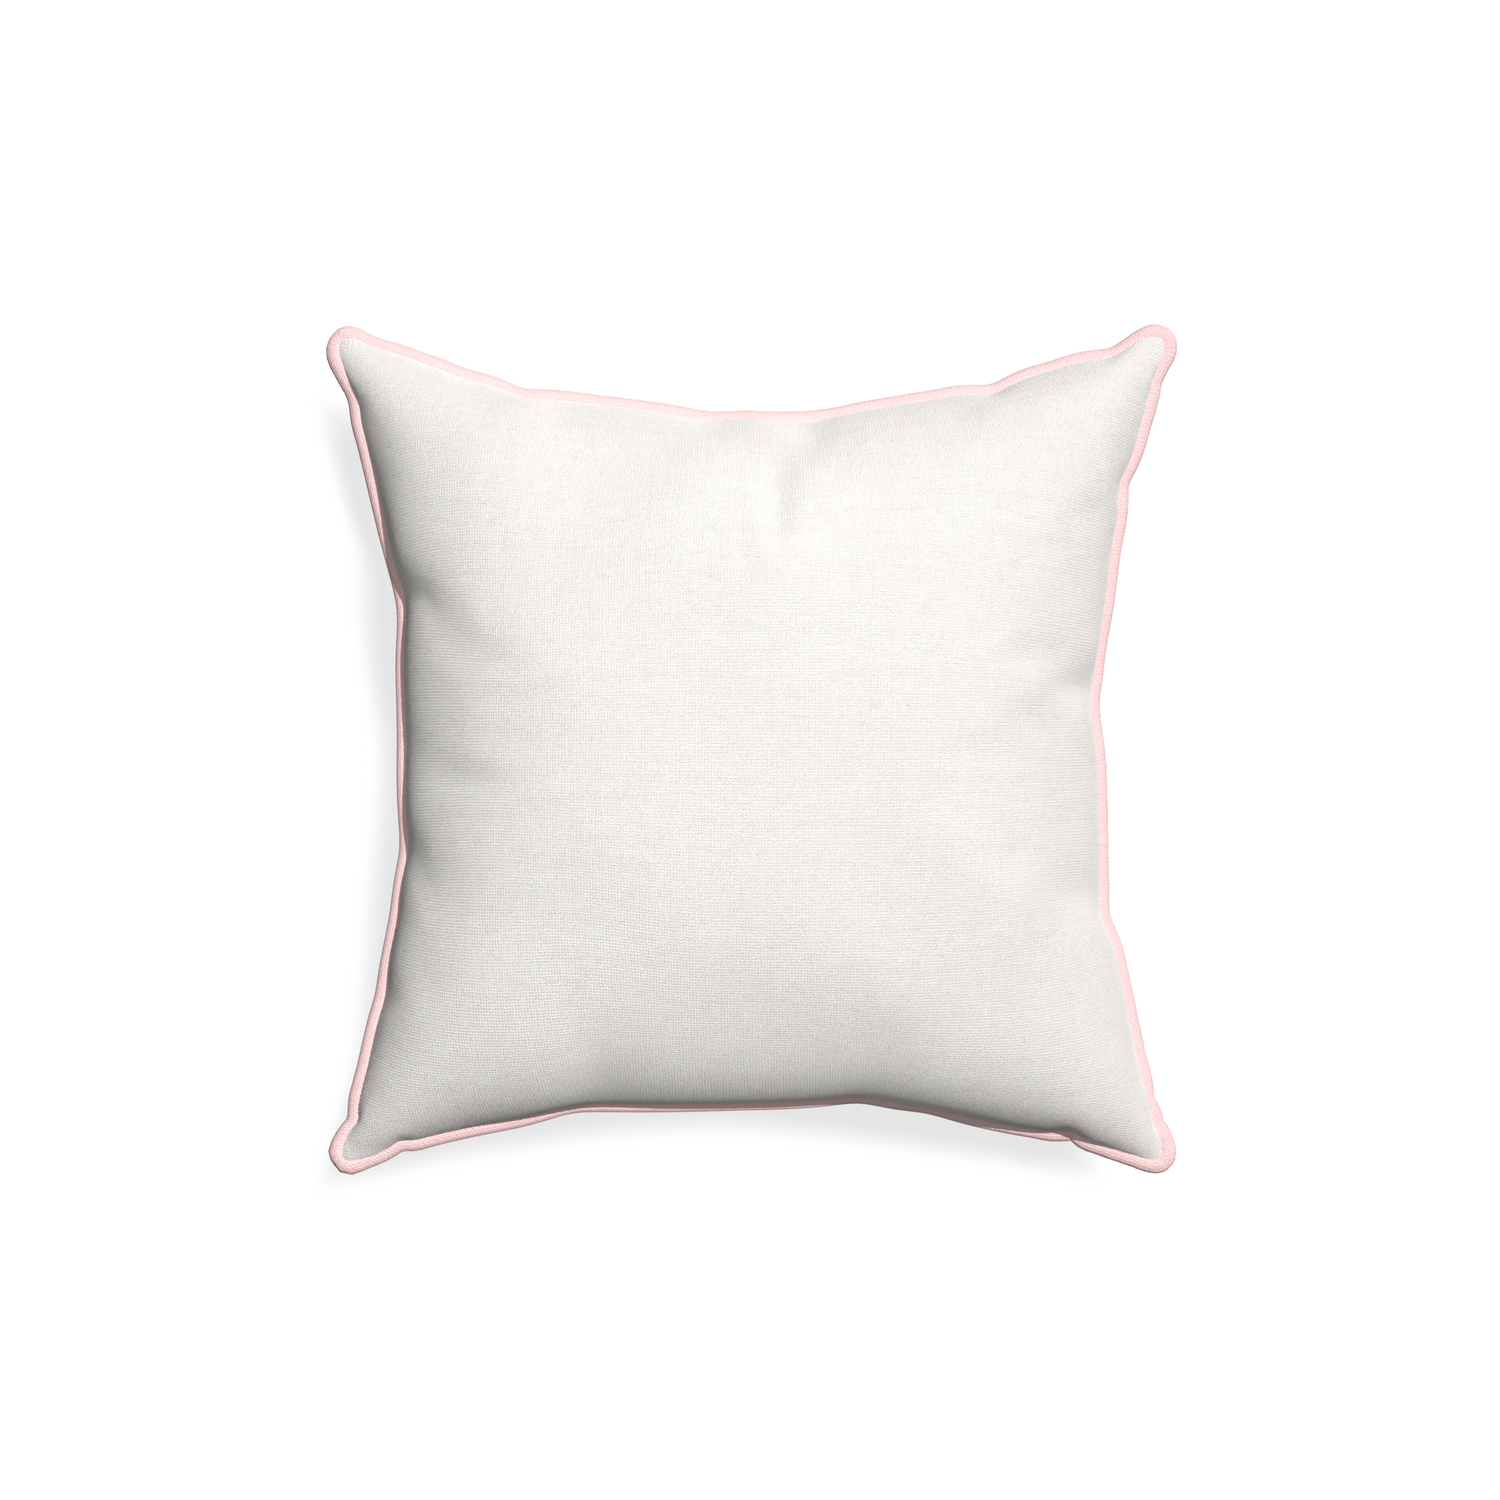 18-square flour custom pillow with petal piping on white background